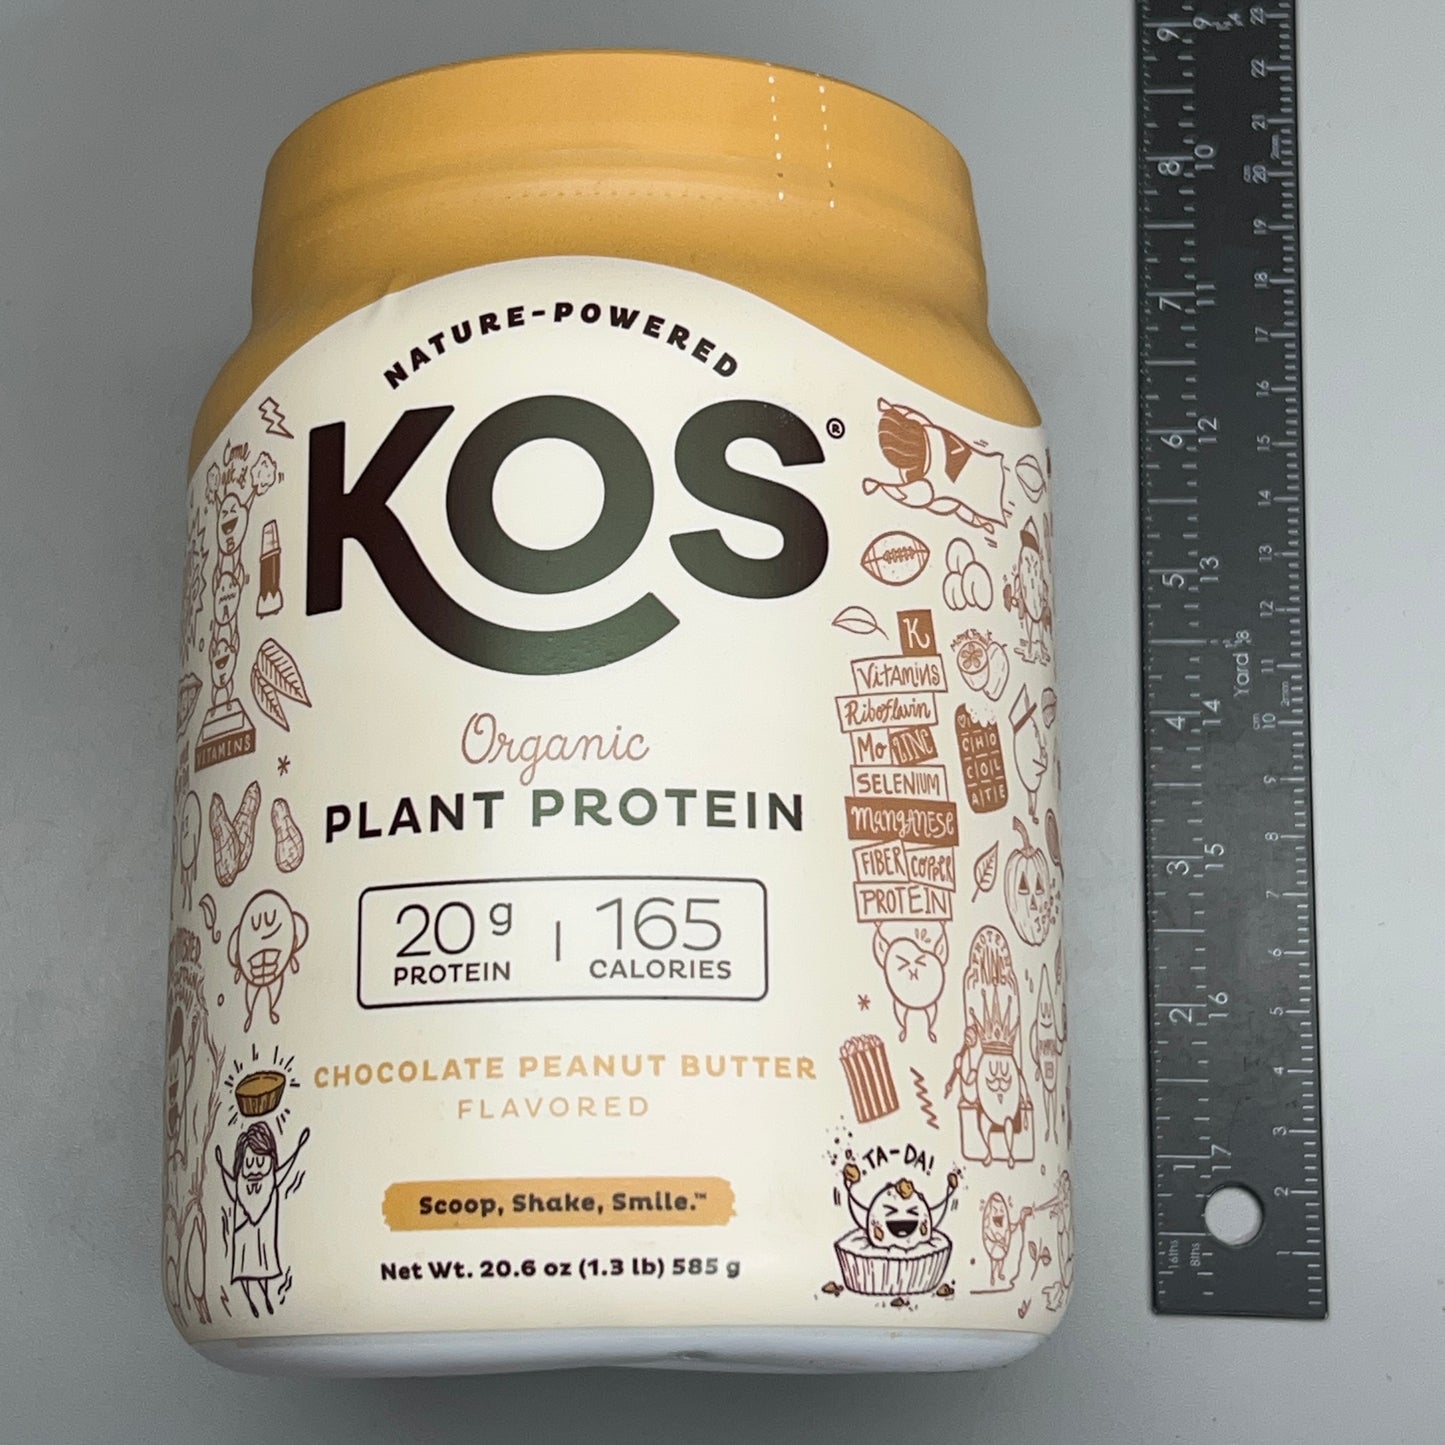 KOS Chocolate Peanut Butter Flavored Organic Plant Protein Powder 20.6 oz Exp 12/24 (New)